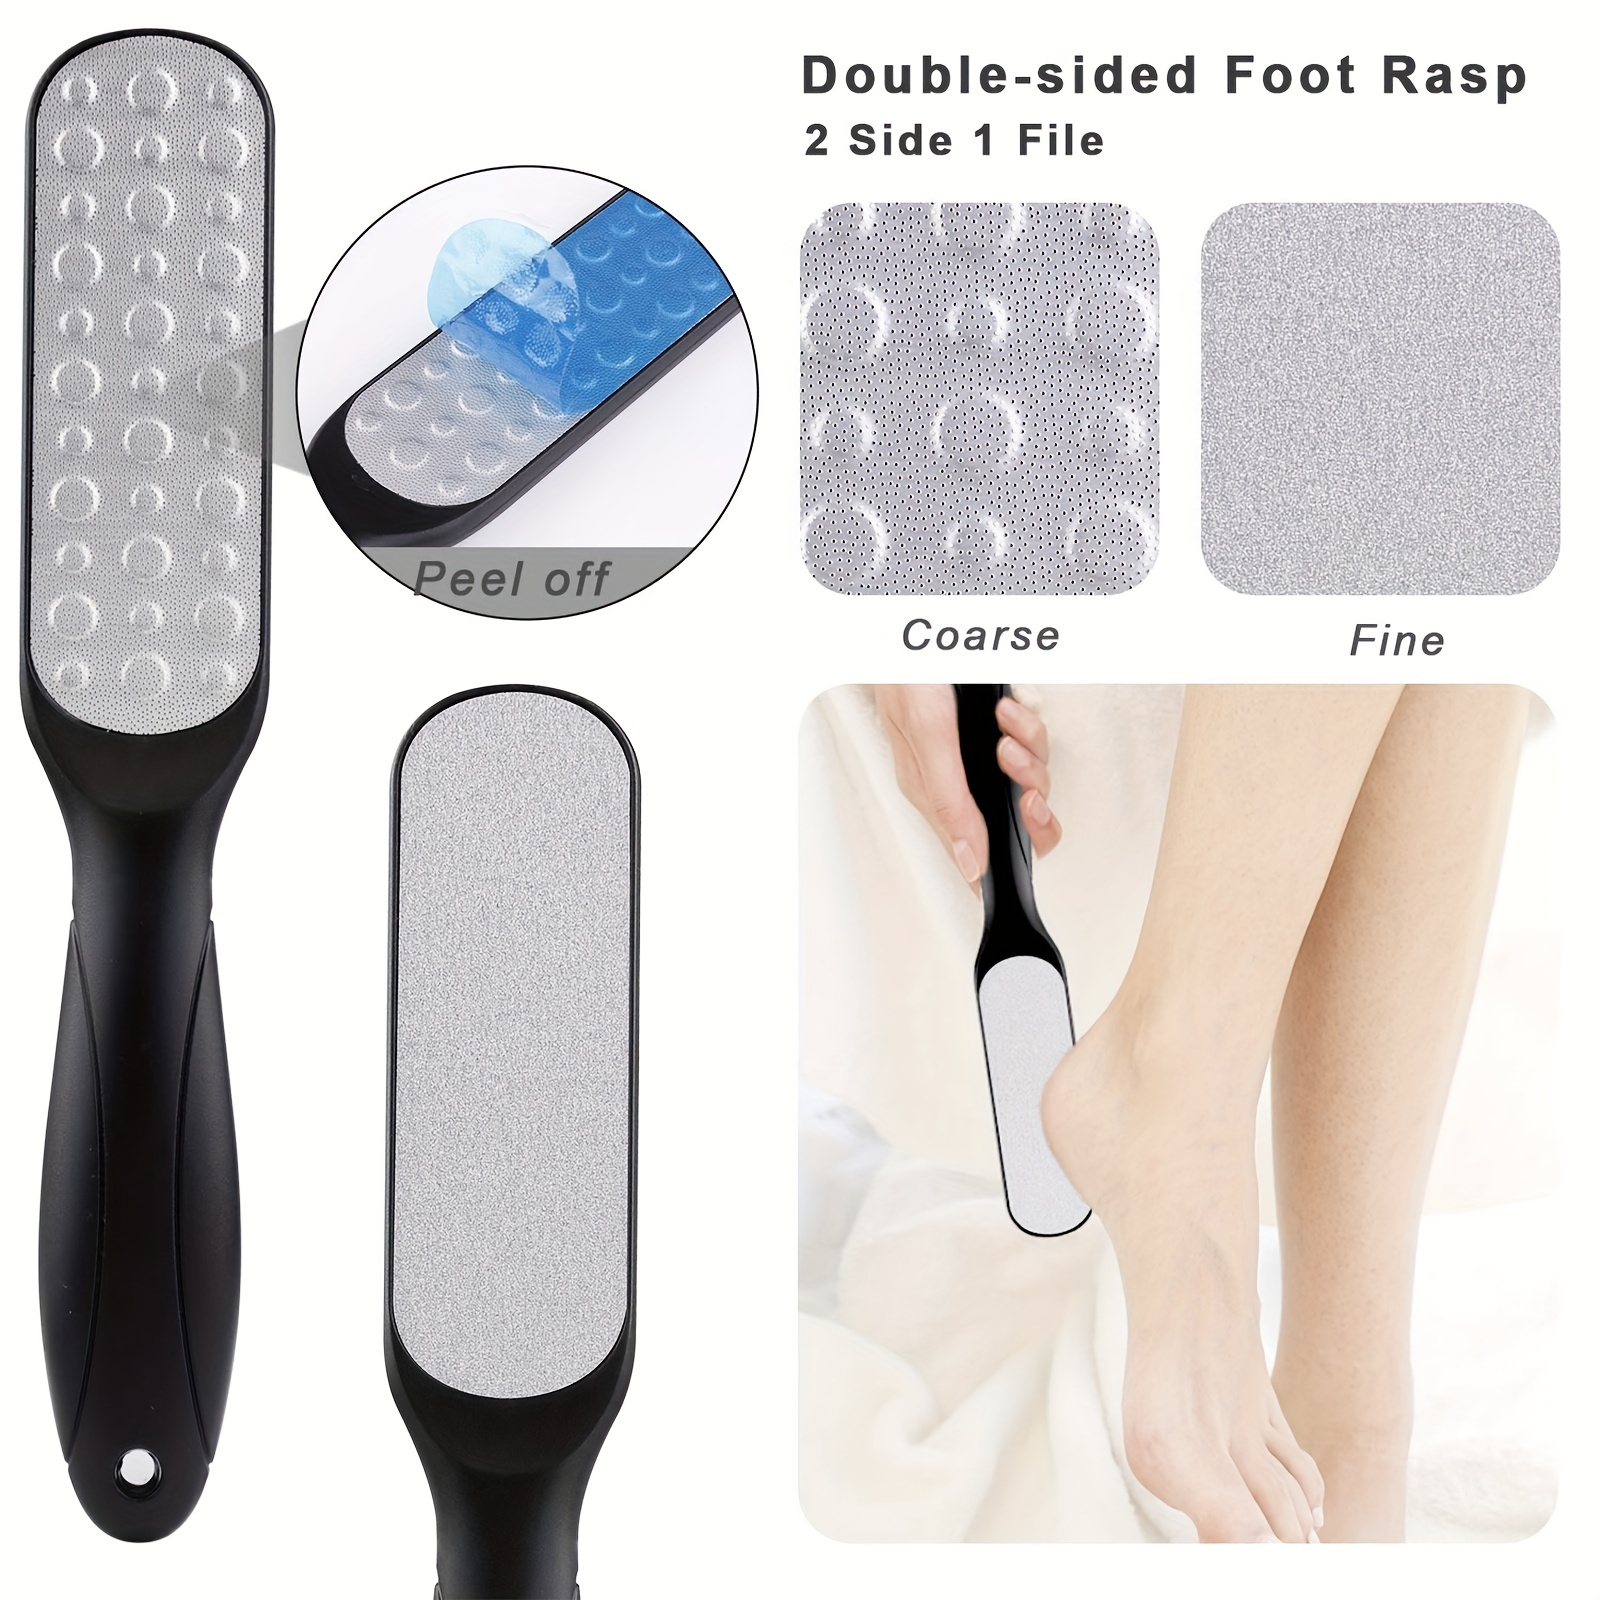 Foot Callus Remover Stainless Steel Coarse File Foot Rasp Foot